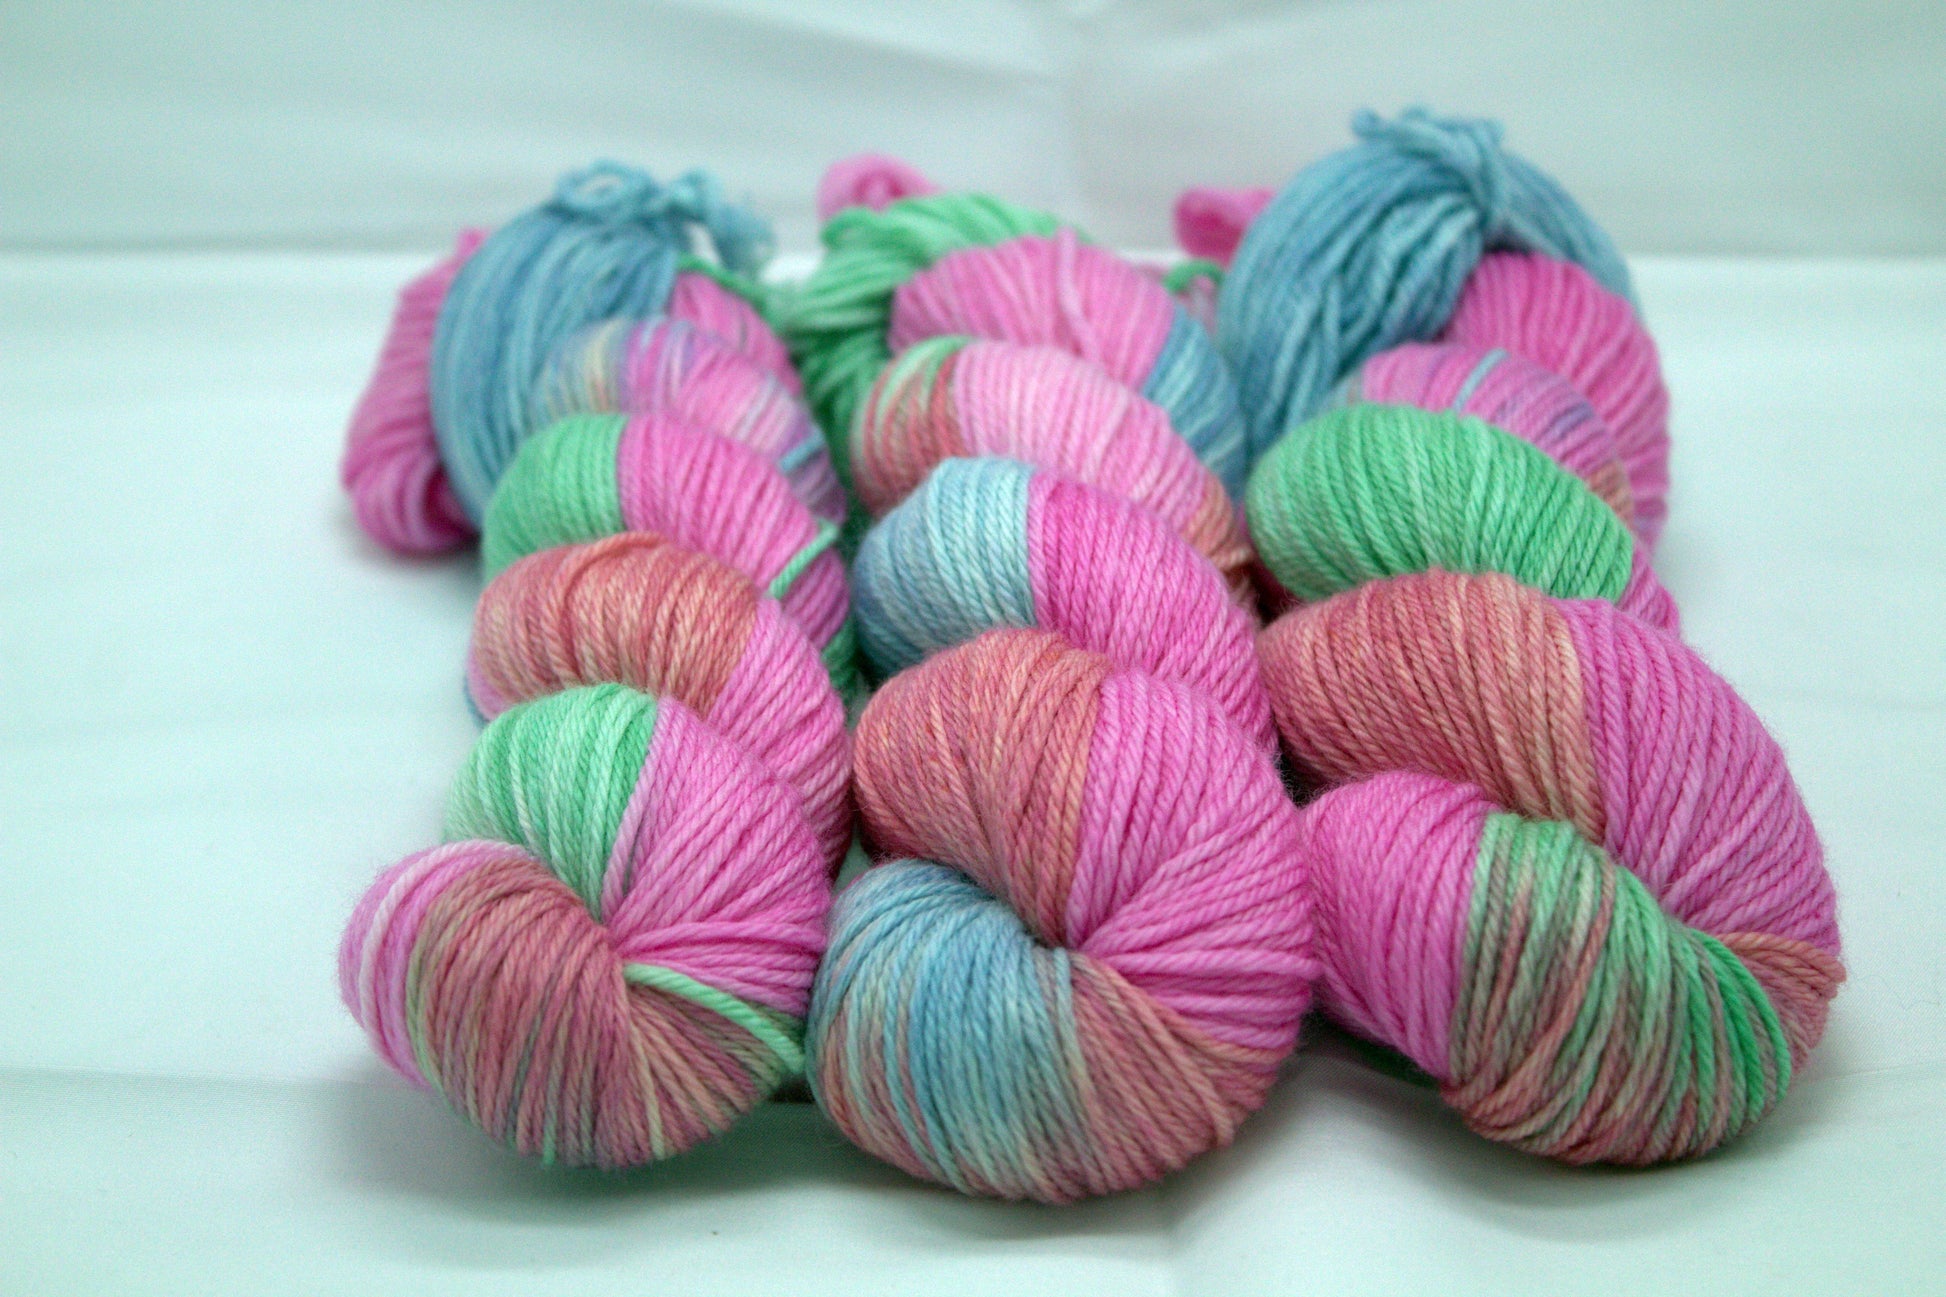 three twisted skeins variegated pinks, blue and green yarn on white background.